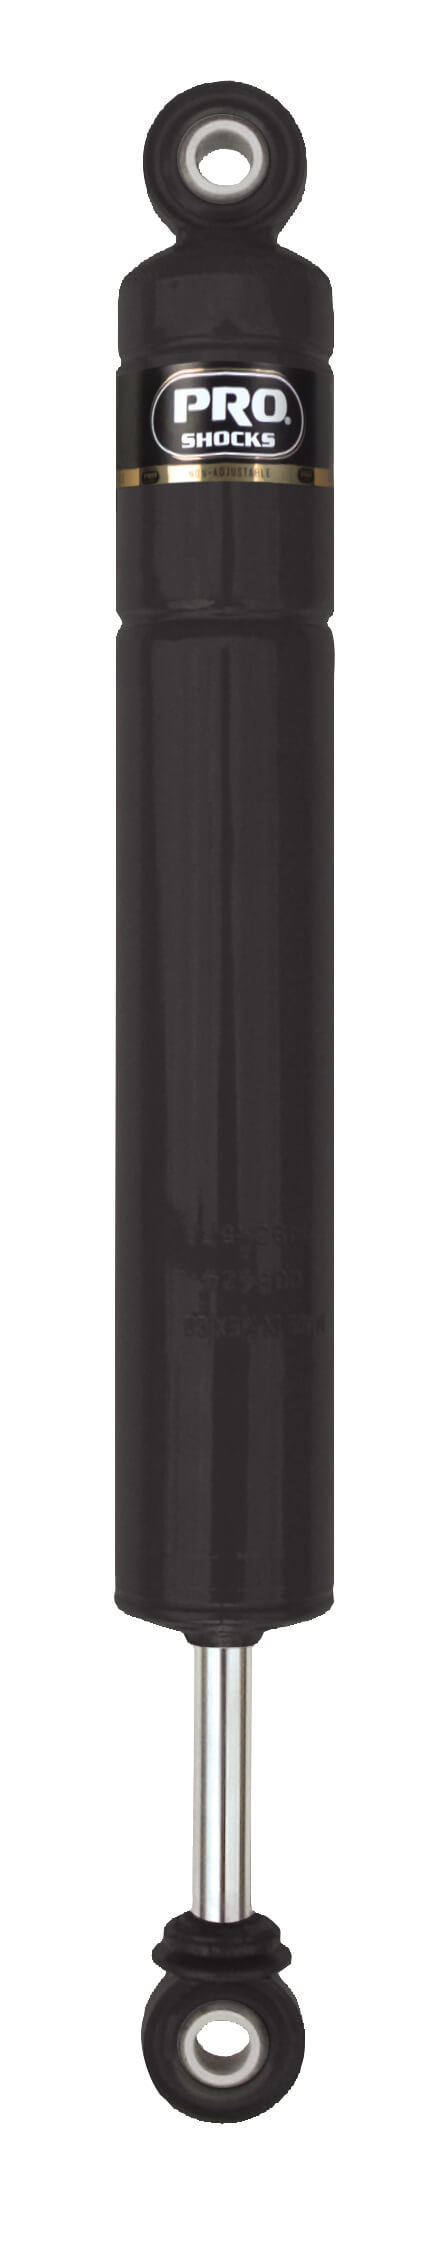 Pro Shock WB96BK Shock, WB Series, Twintube, 14.50 in Compressed / 23.25 in Extended, 2.00 in OD, C6-R6 Valve, Steel, Black Paint, Each